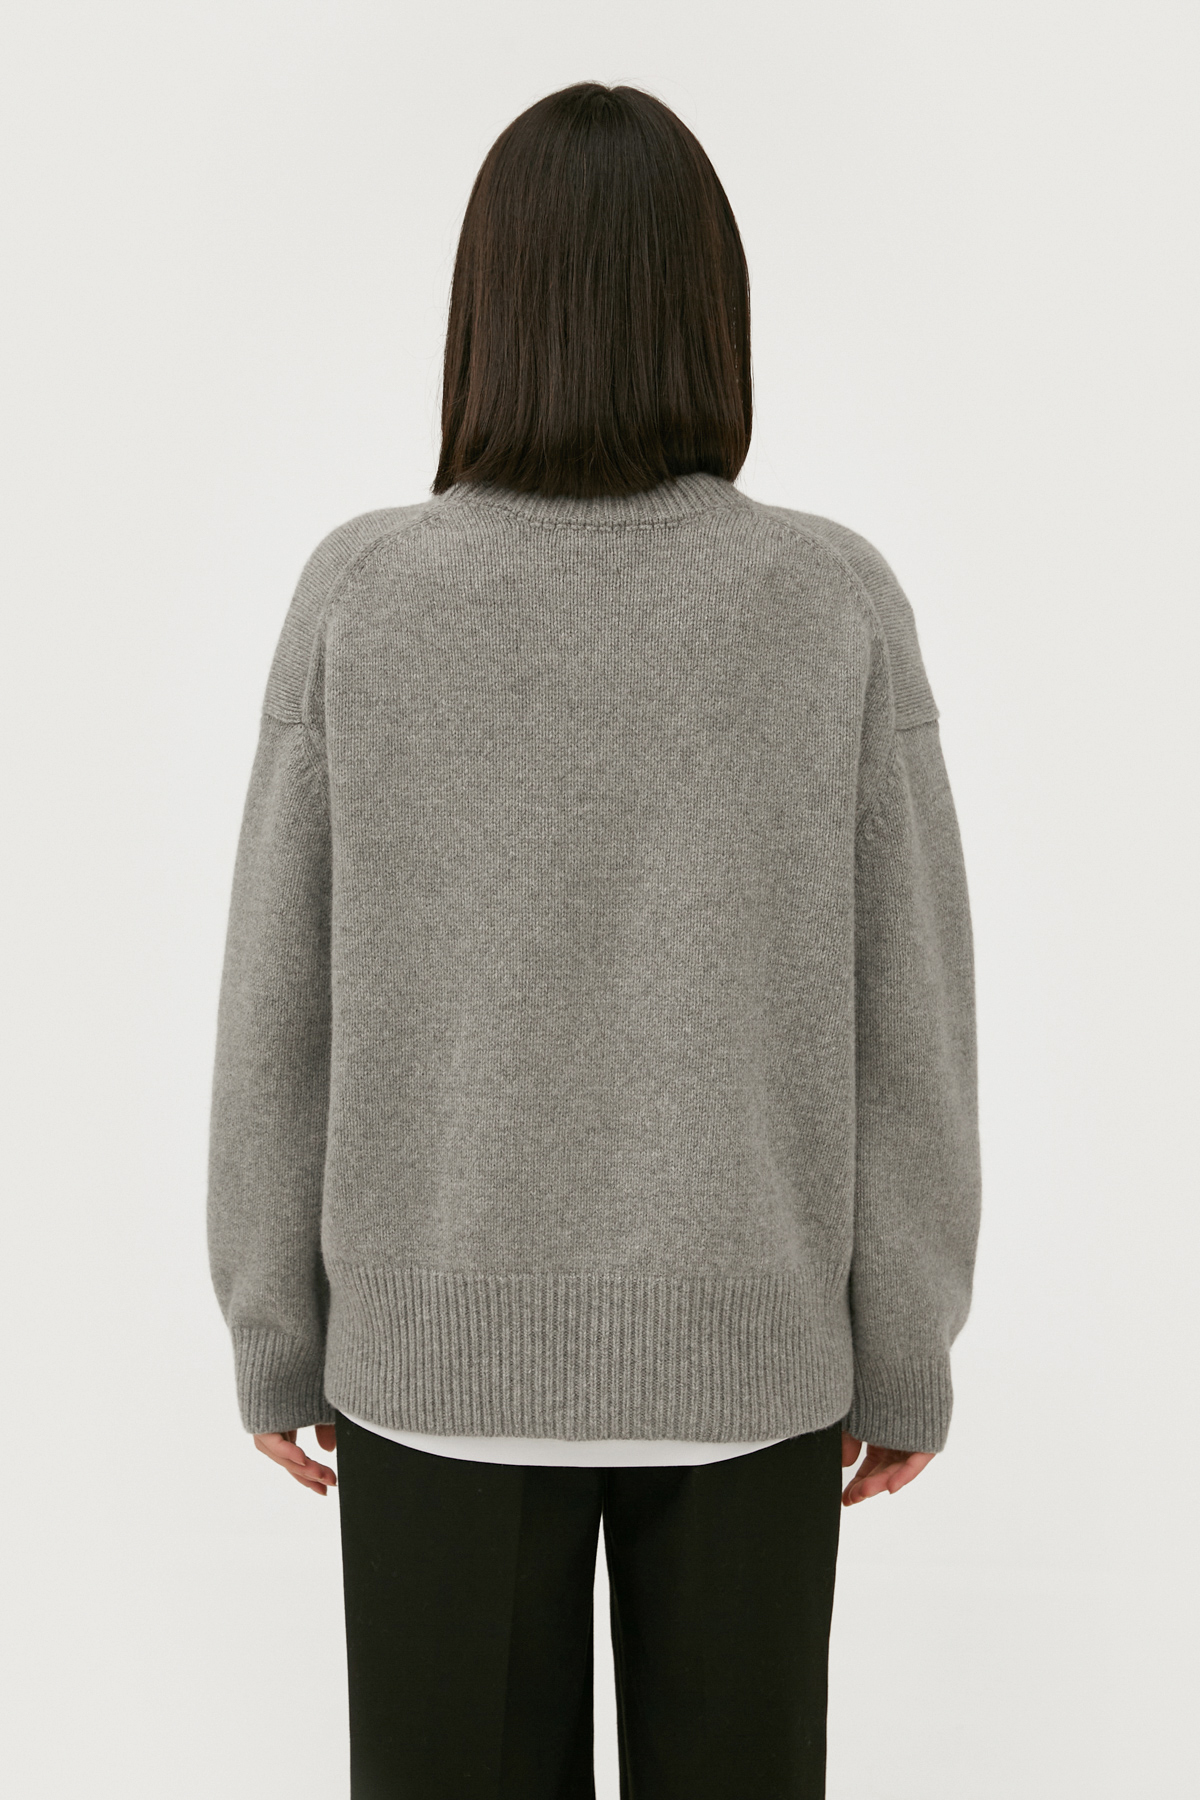 Cashmere grey loose-fit sweater, photo 5